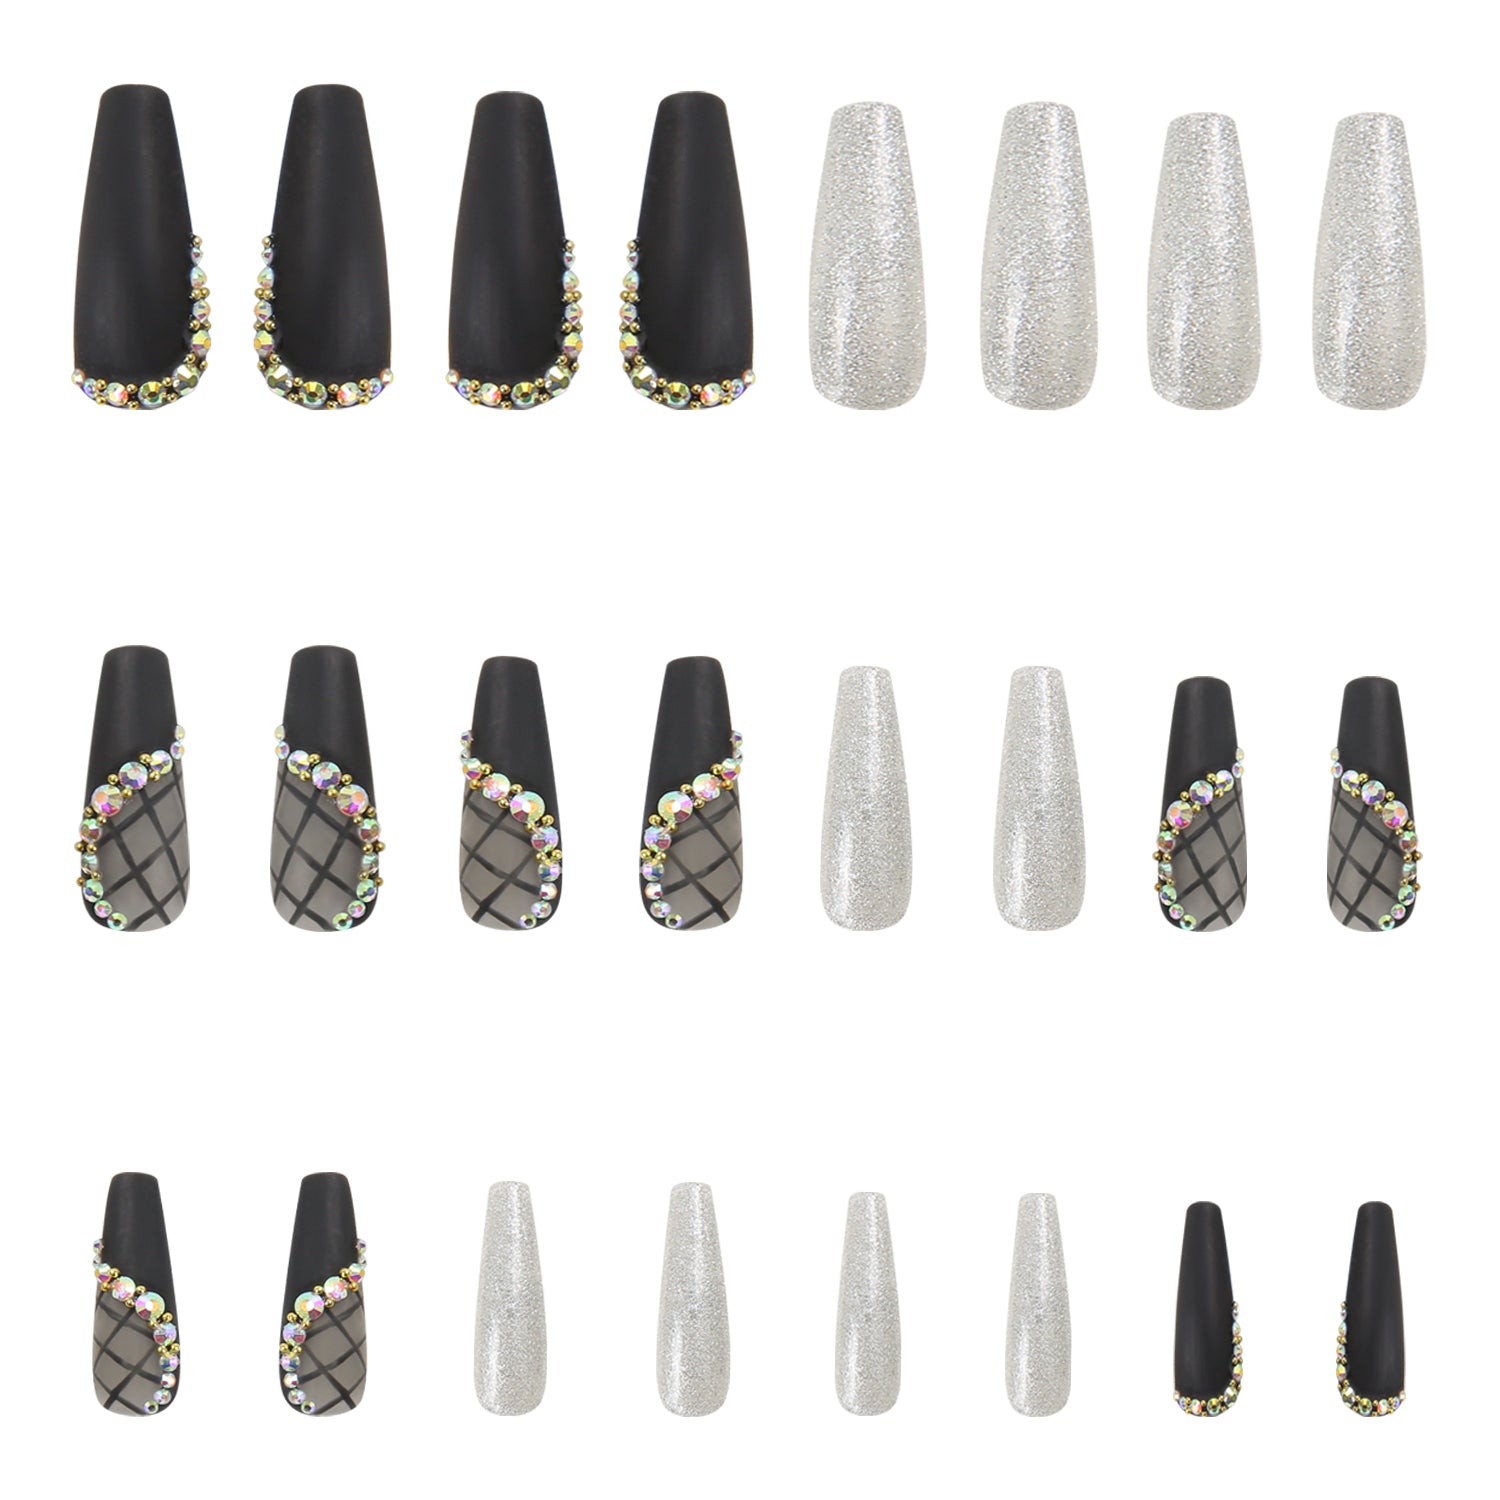 Lovful Black Lace press-on nails set, includes 24 black and silver shimmer nails with delicate lace decor and rhinestone accents.